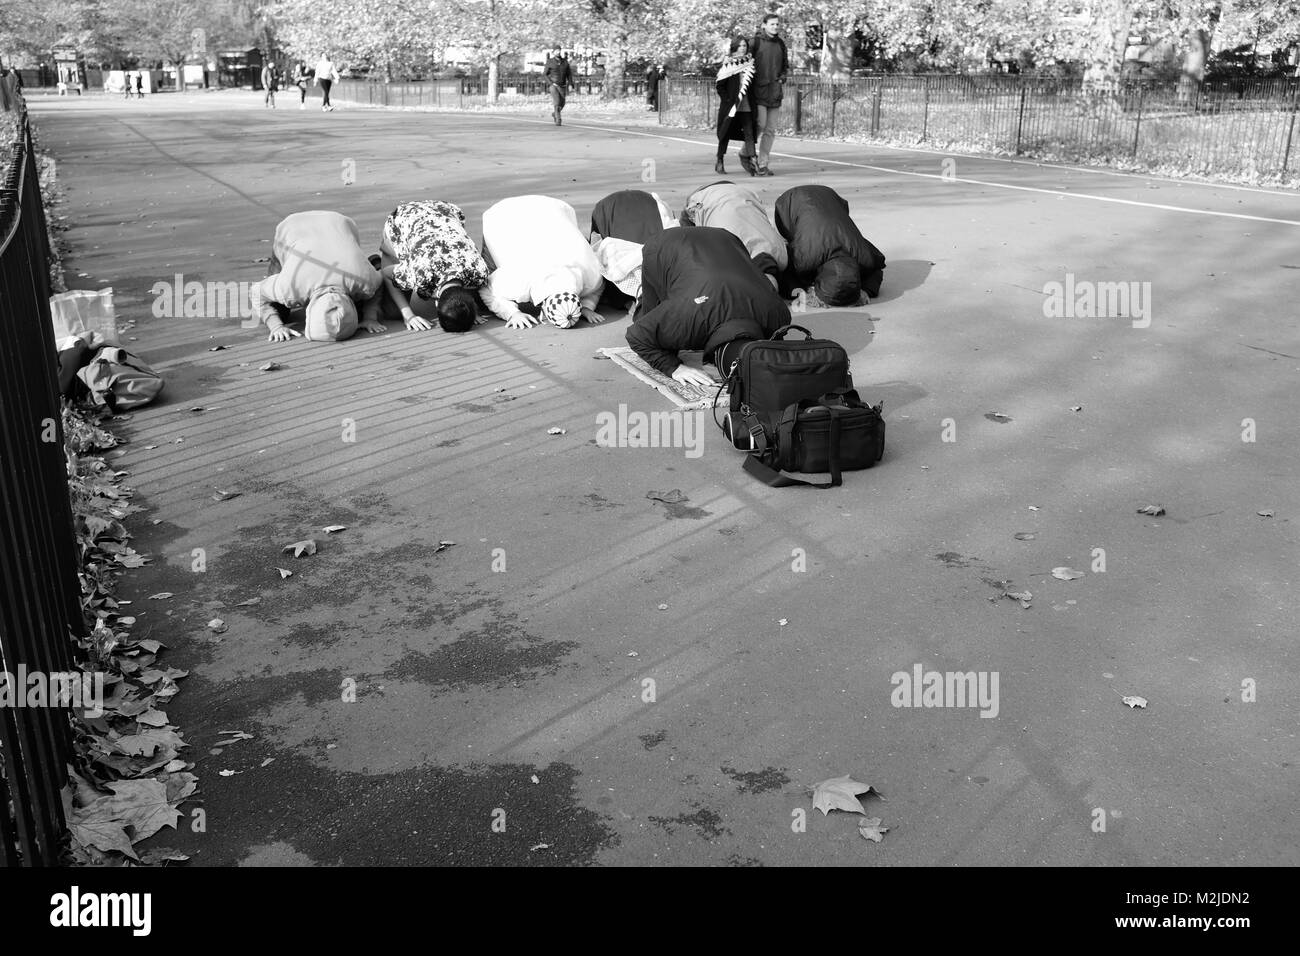 Muslims Praying in Hyde Park, London, England United Kingdom, Credit: London Snapper Stock Photo